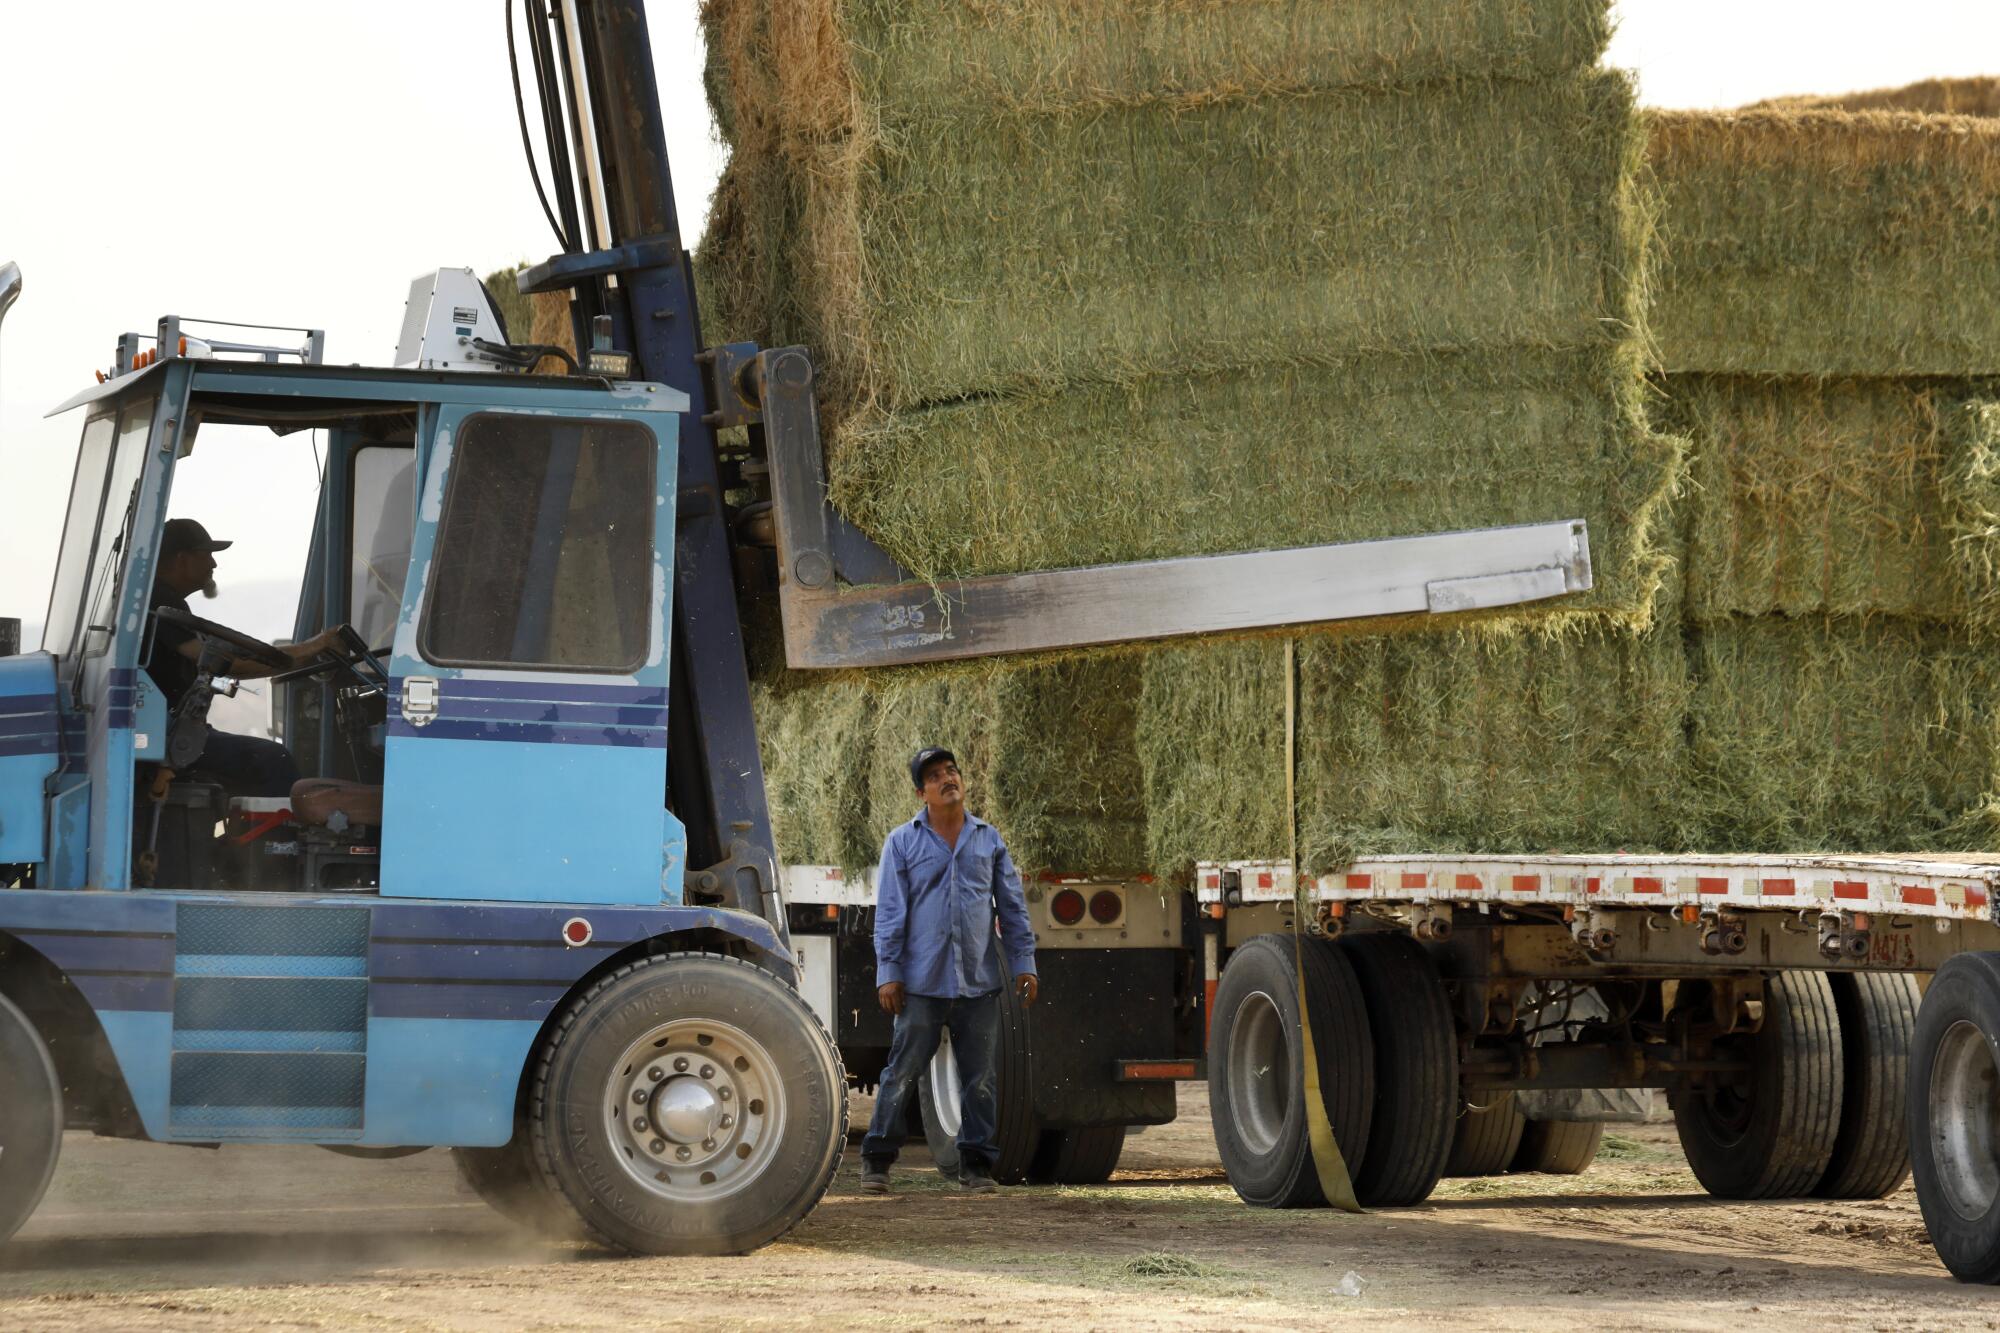 A forklift loads hay bales onto the bed of a semi truck.